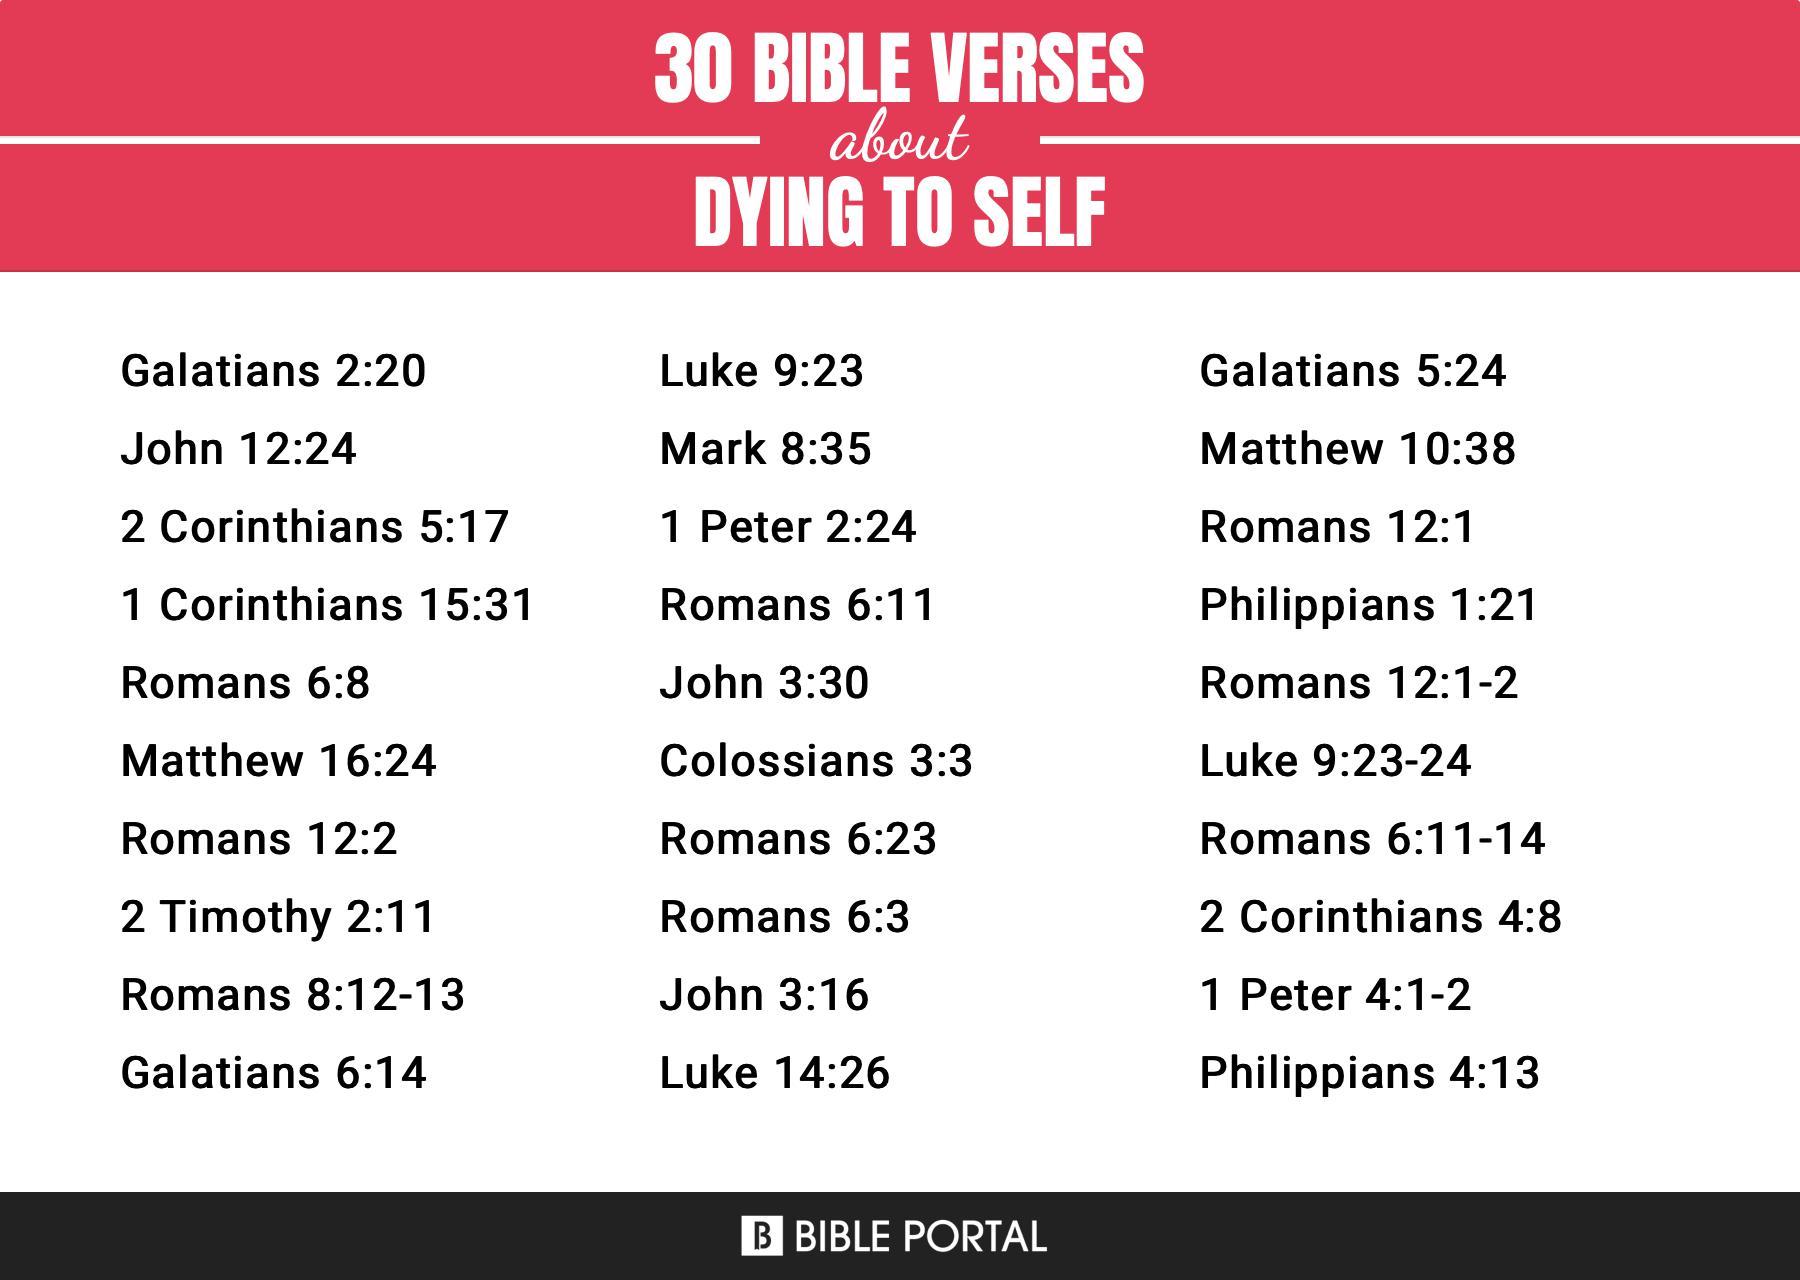 What Does the Bible Say about Dying To Self?